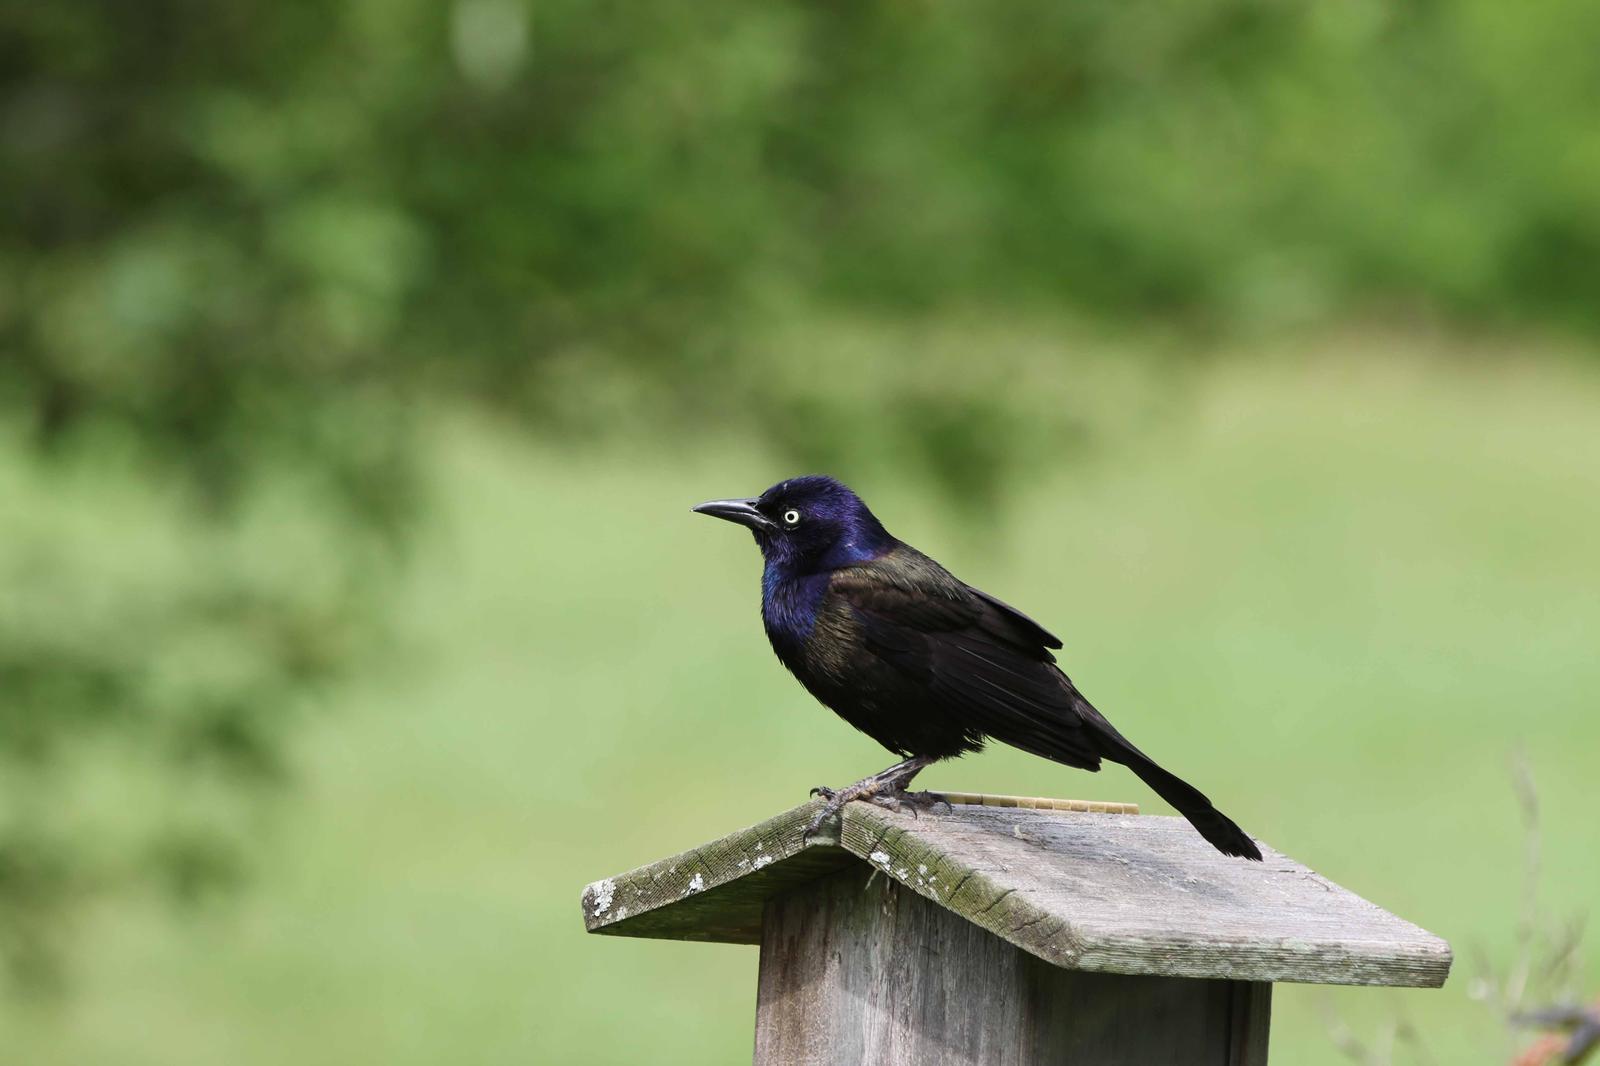 Common Grackle Photo by Kristy Baker